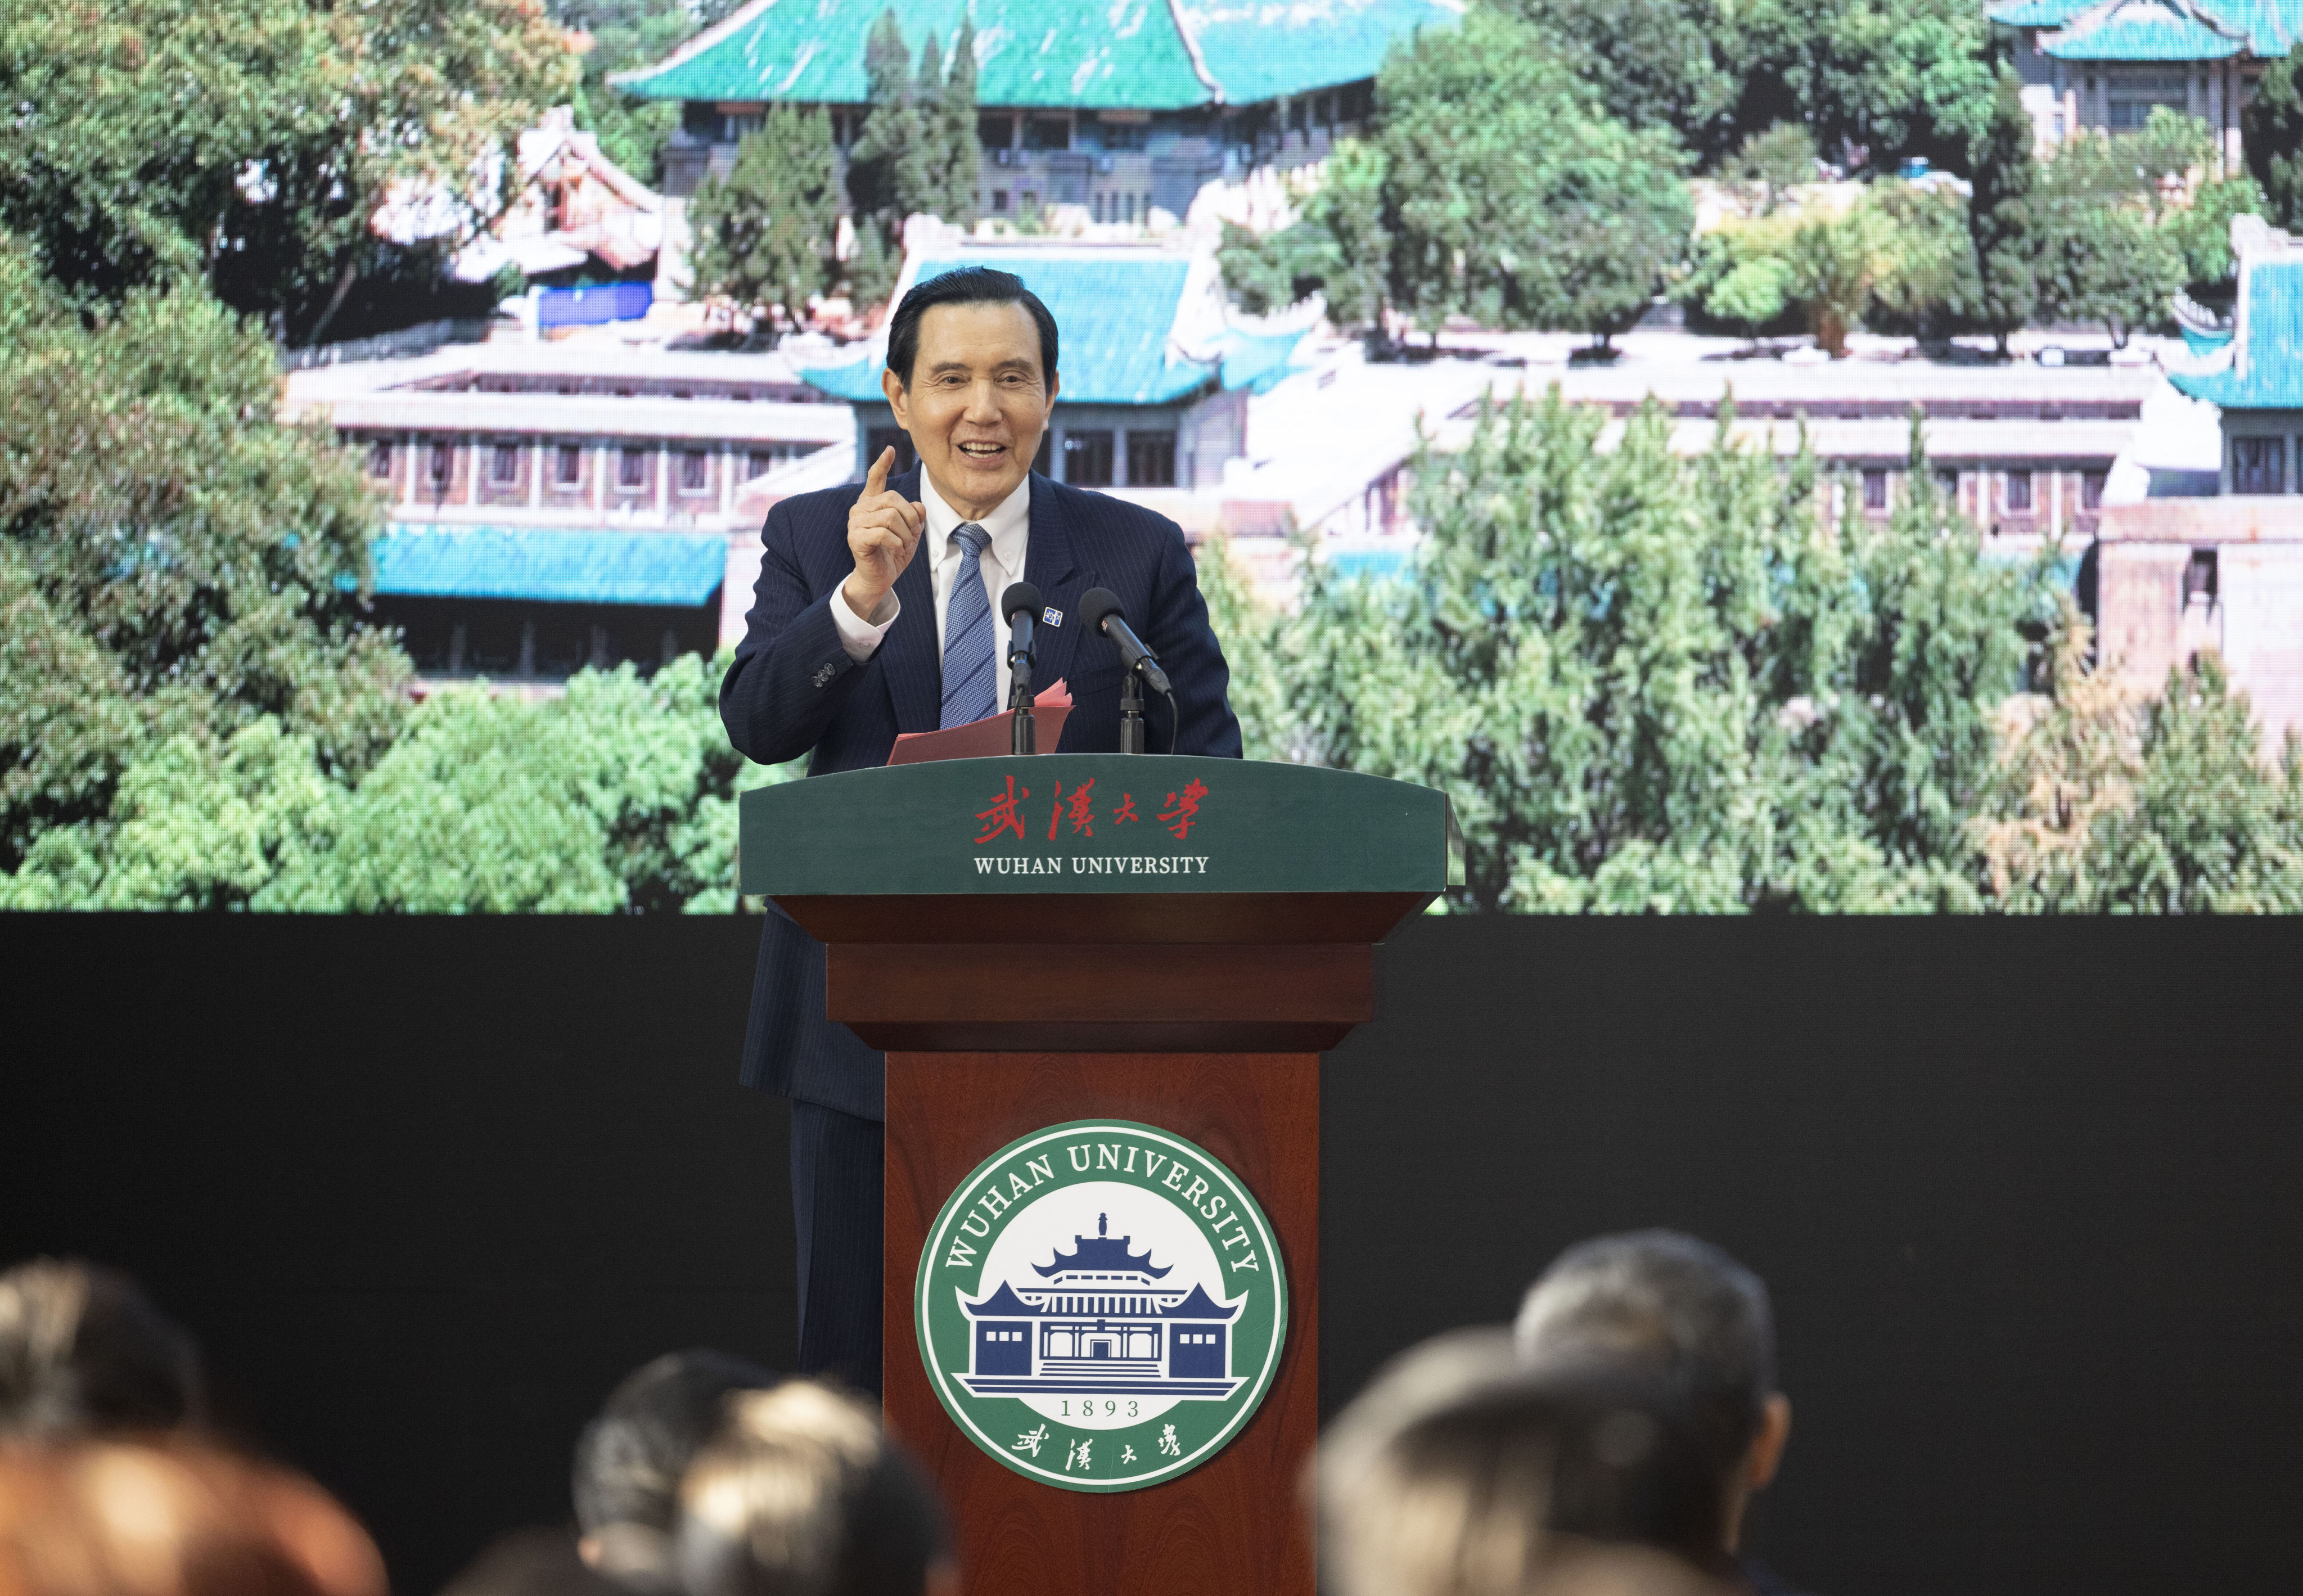 Taiwan’s former president Ma Ying-jeou speaks during a visit to Wuhan University in Wuhan, in central China’s Hubei Province, on March 30, 2023. Ma’s recent comment on “Yan Huang Zisun” references a story on the origin of the Han Chinese people. Photo: Xinhua